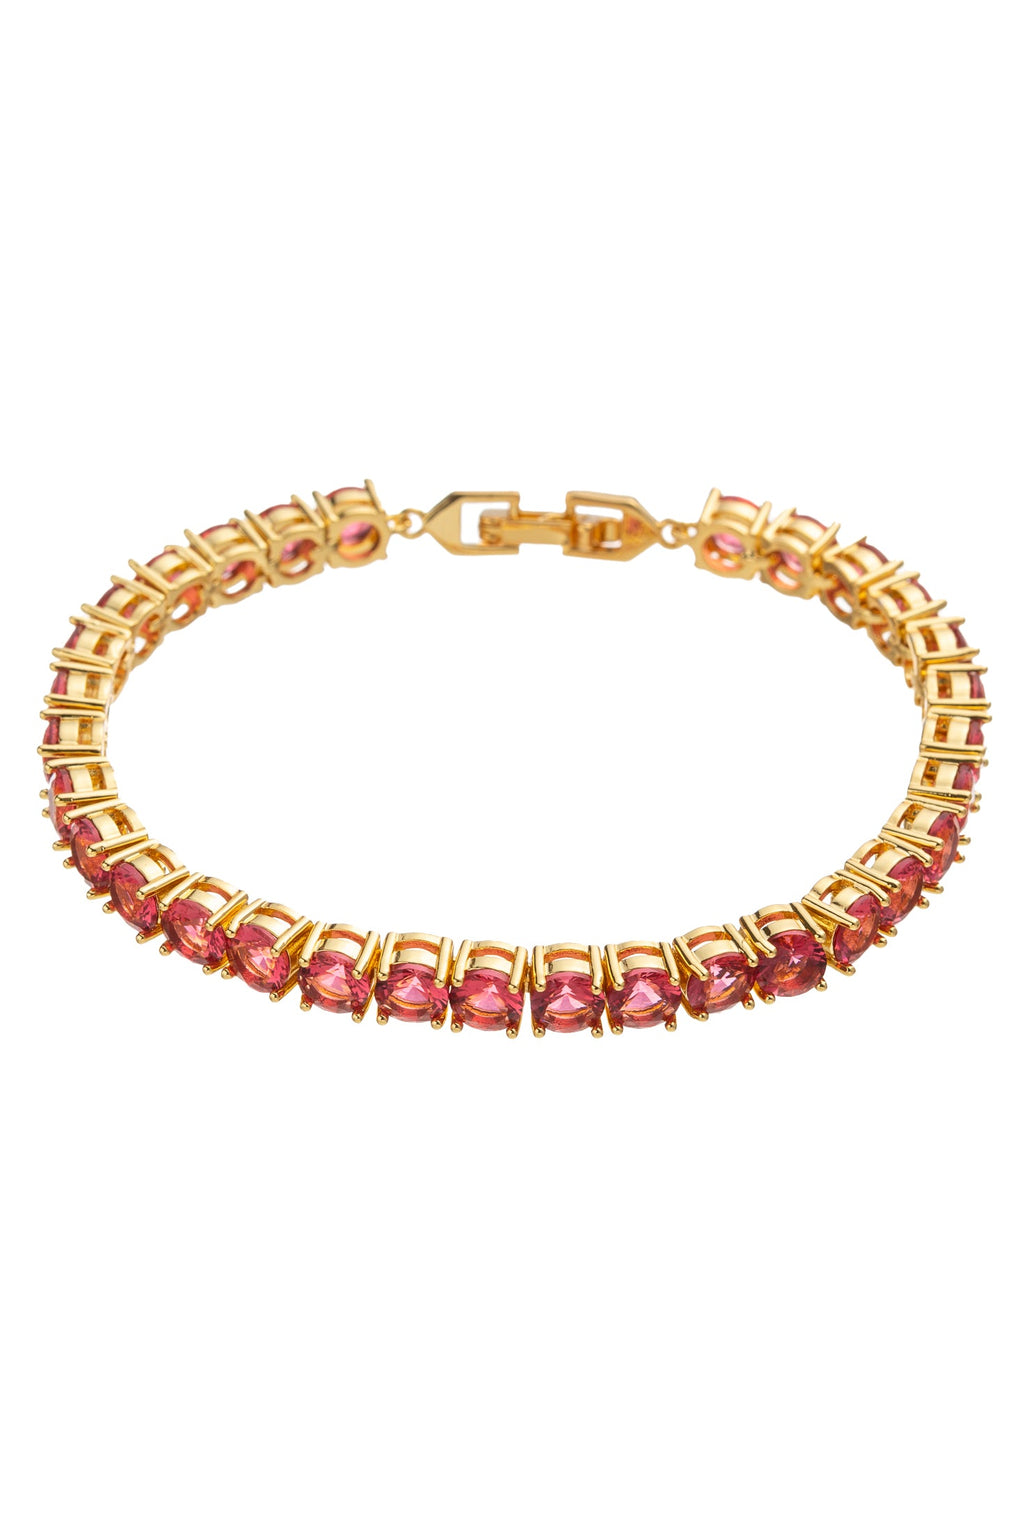 Harper Red Cubic Zirconia Tennis Bracelet: A Stunning Statement of Passion and Glamour.